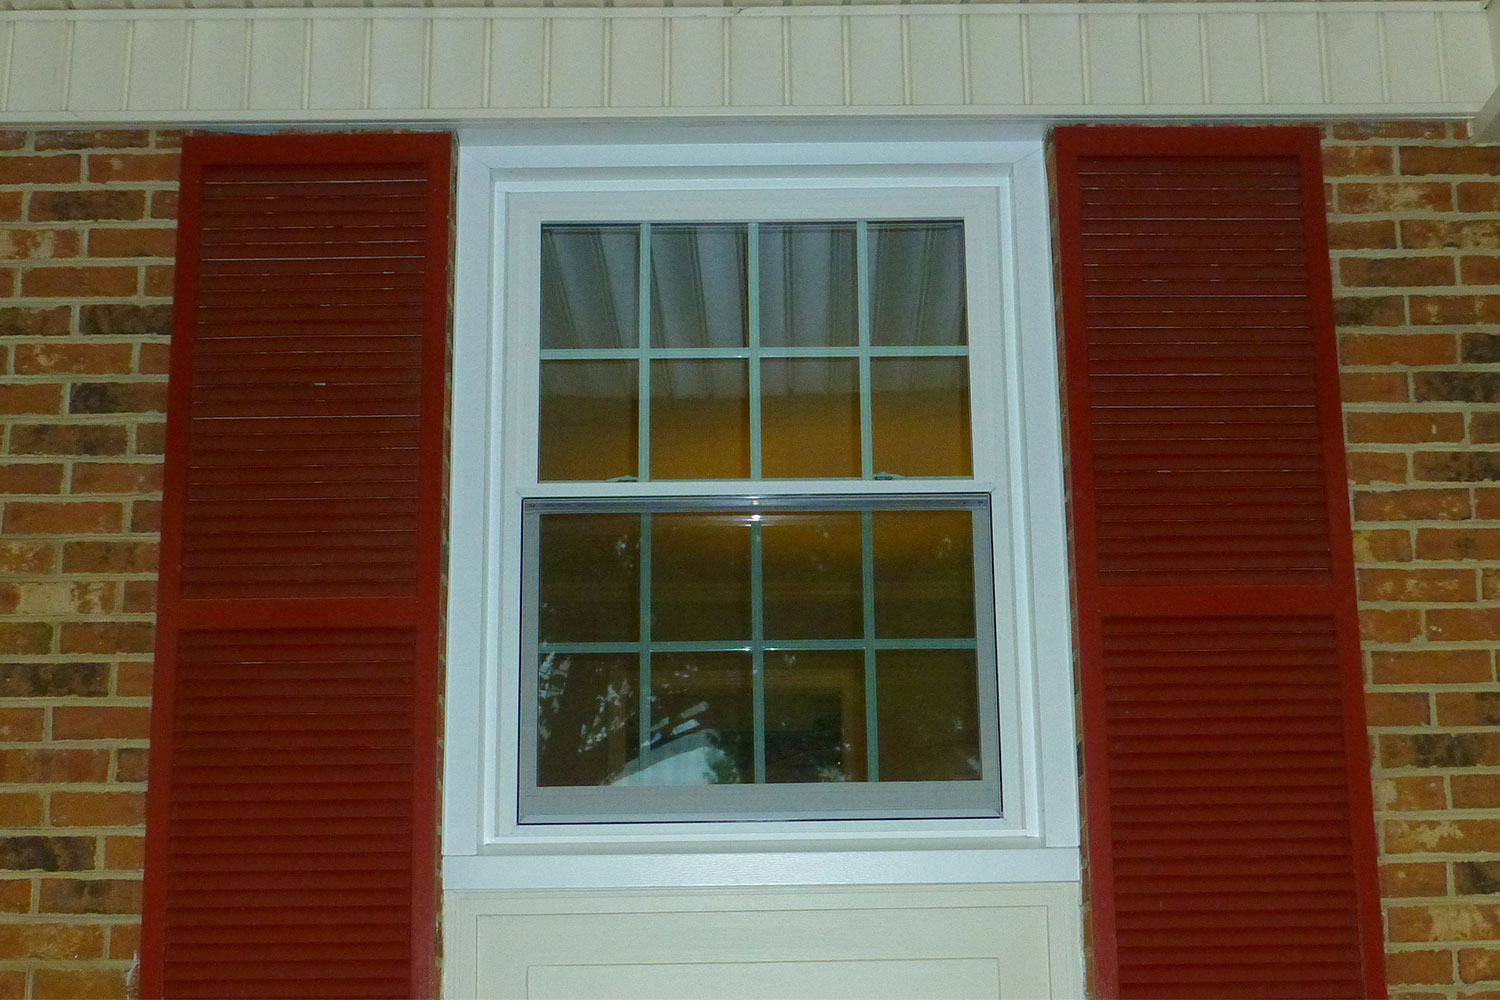 A window with red sides